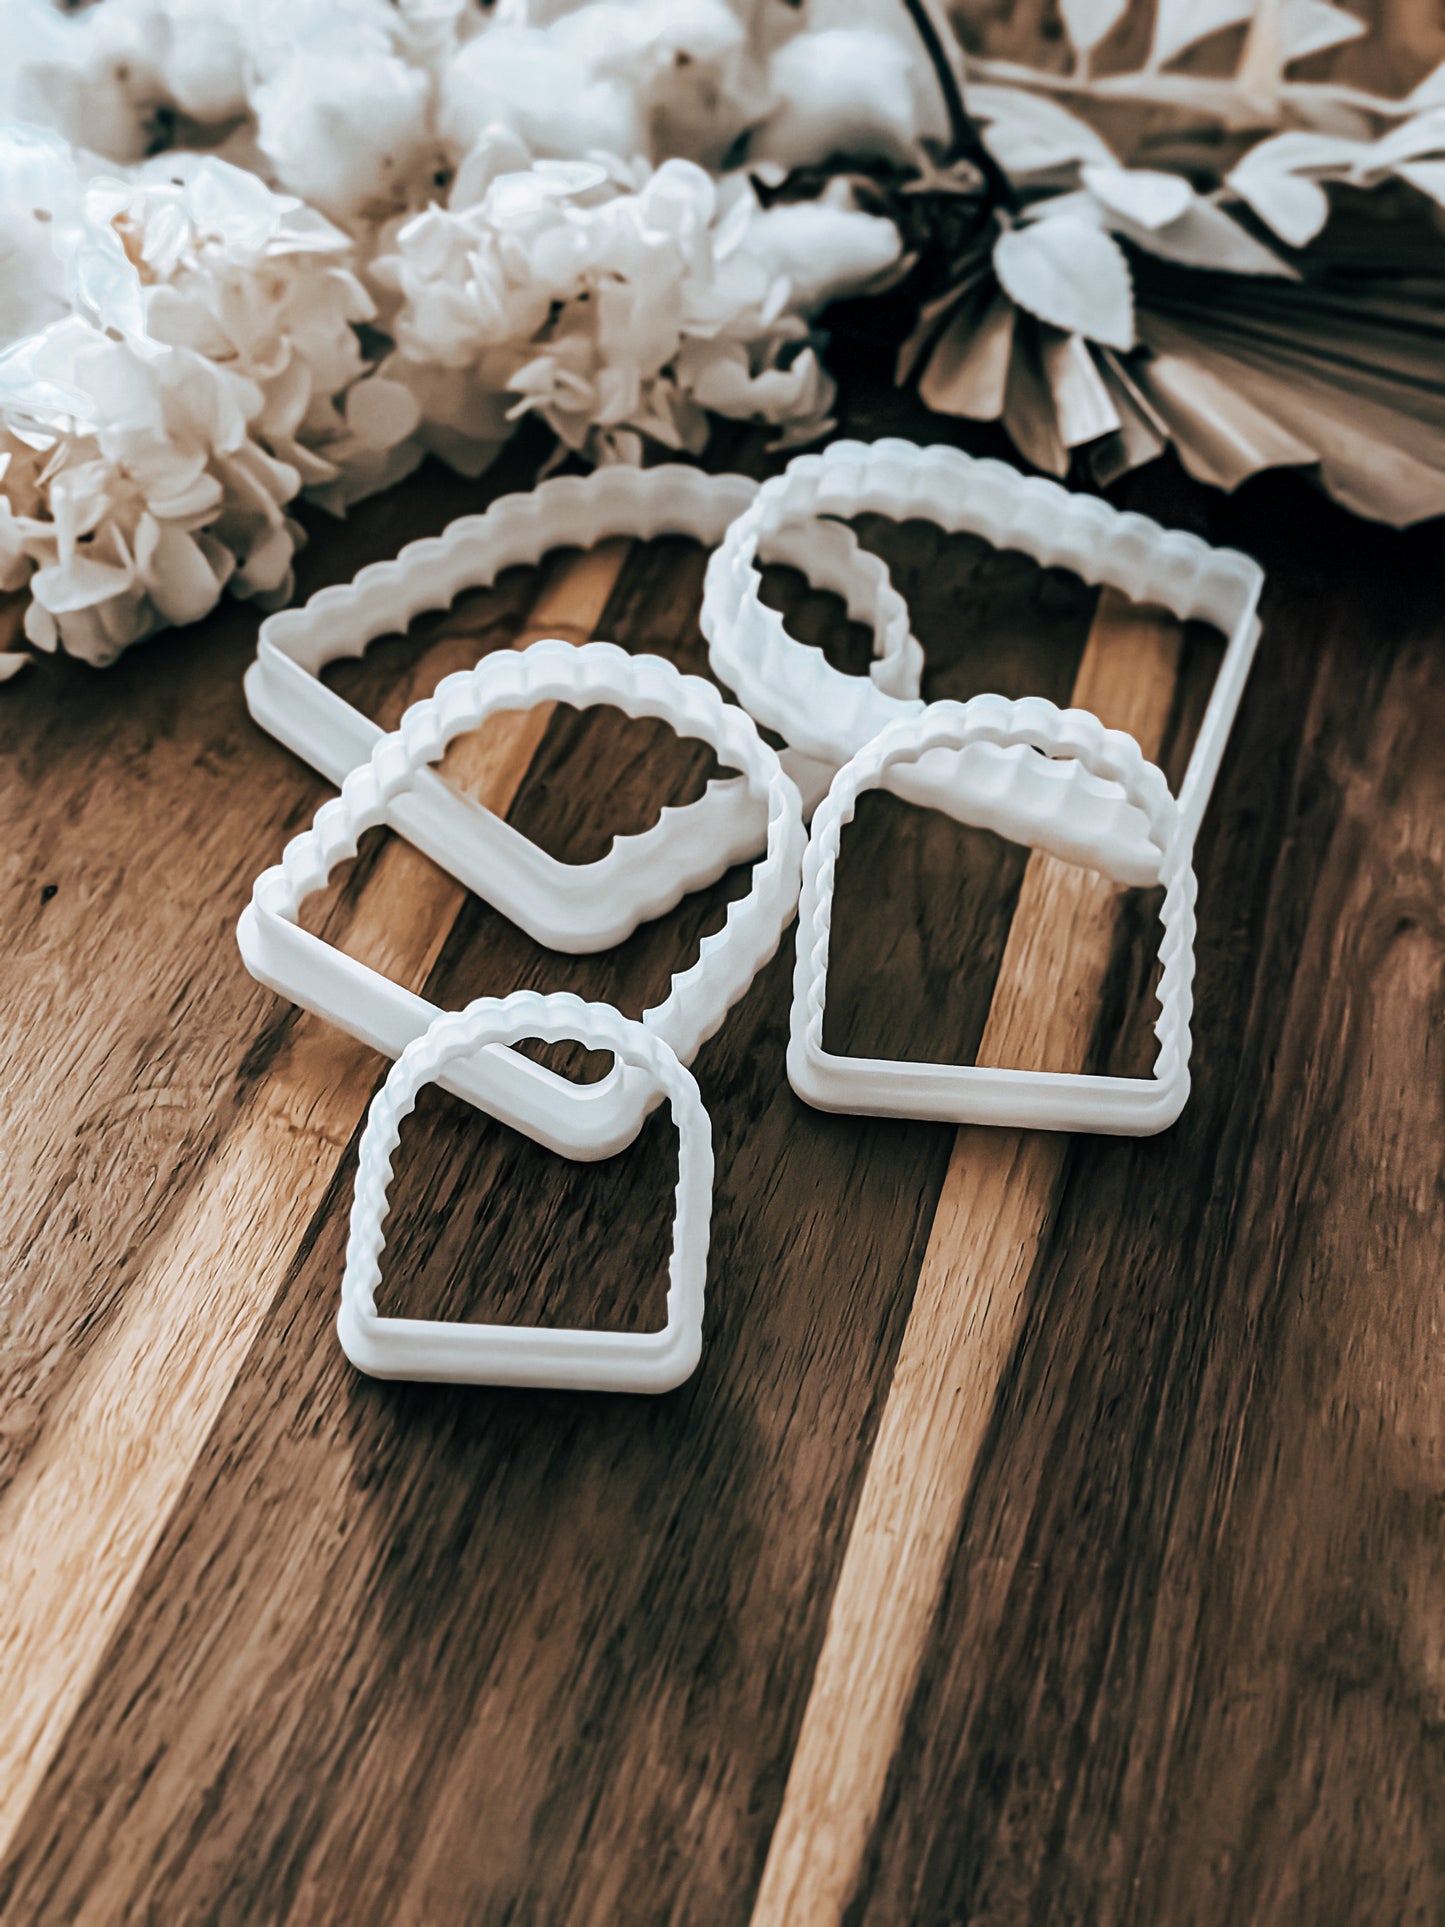 Scalloped Arch Shape - Cookie Cutters